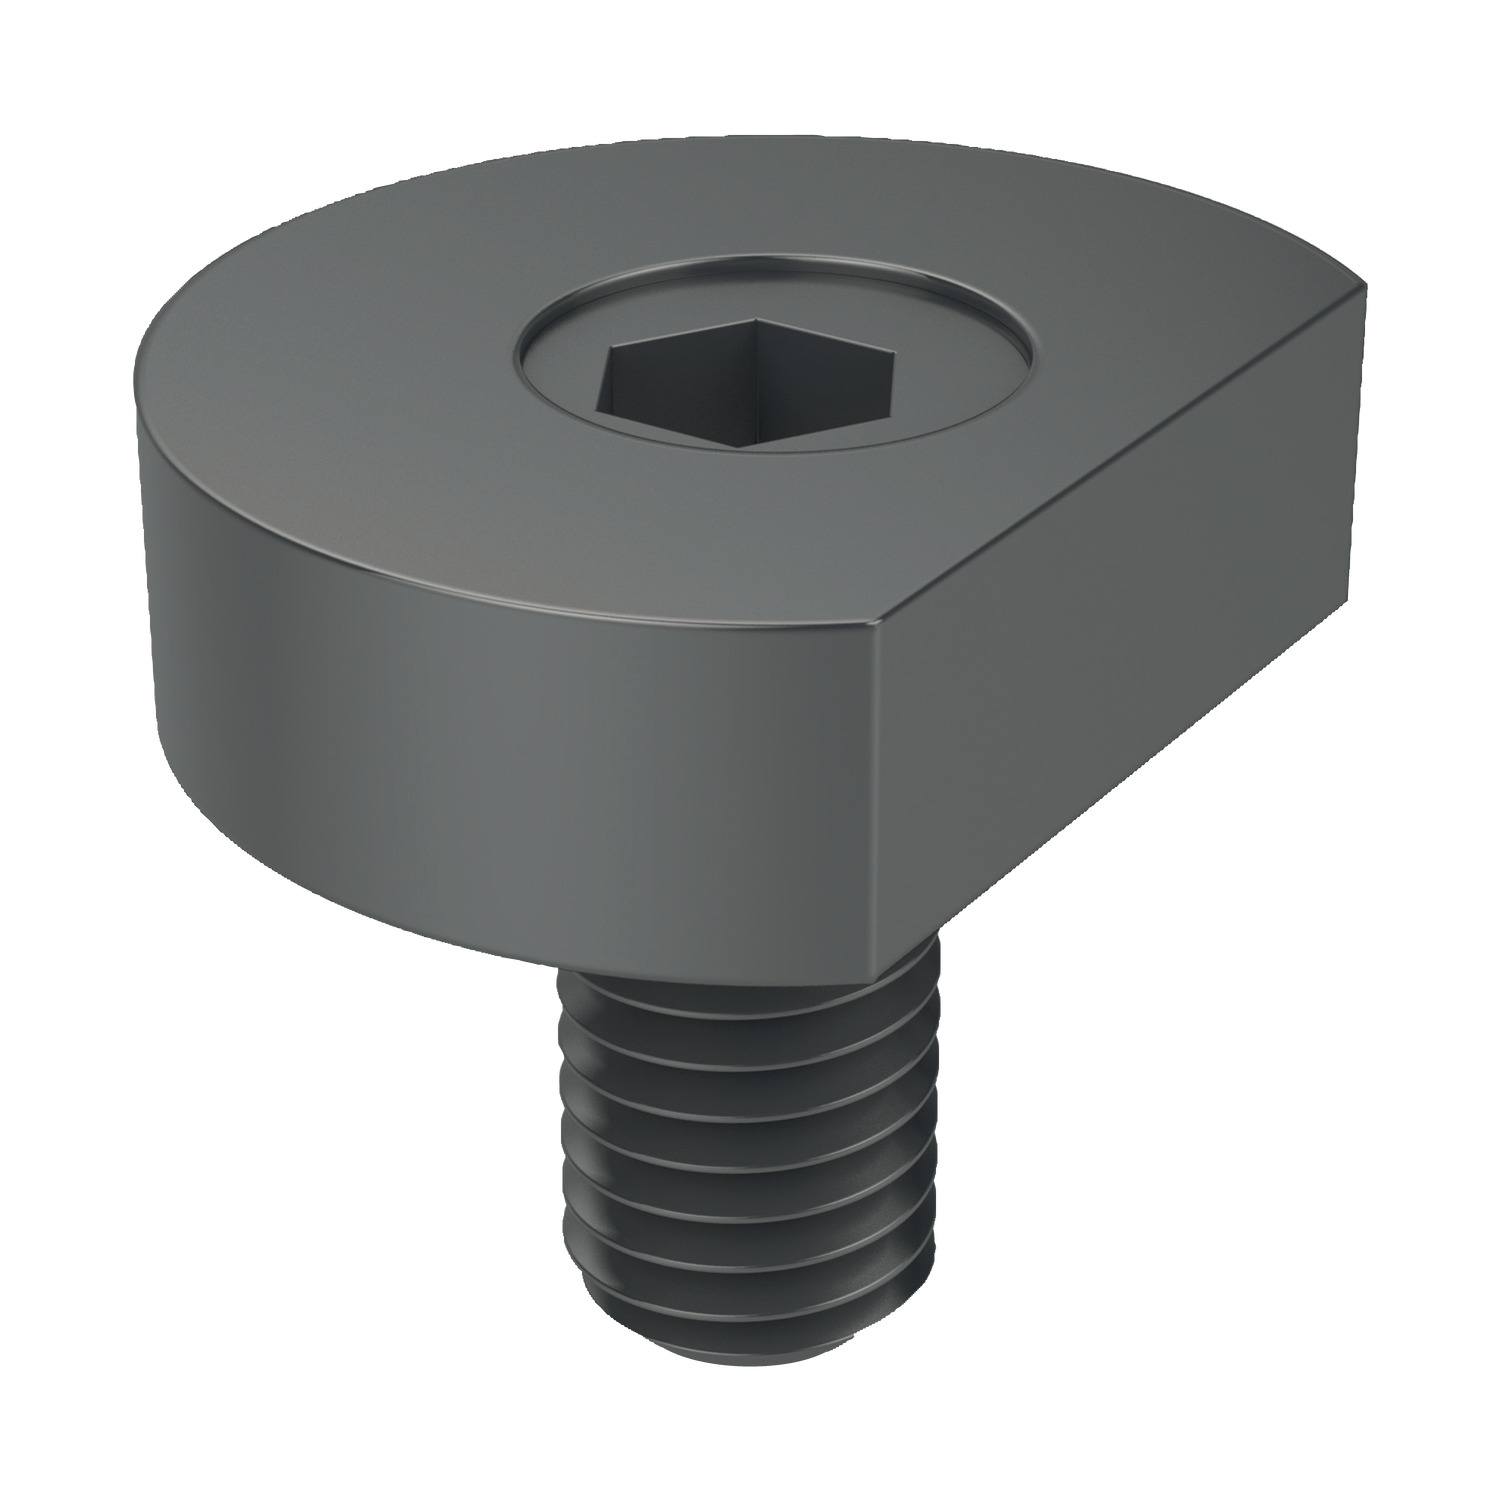 Machinable Fixture Clamps The machinable fixture clamp can be used to hold irregular parts as the face of the clamp can be machined to suit the workpiece which also can be achieved on the machinable pitbull clamp 12032.